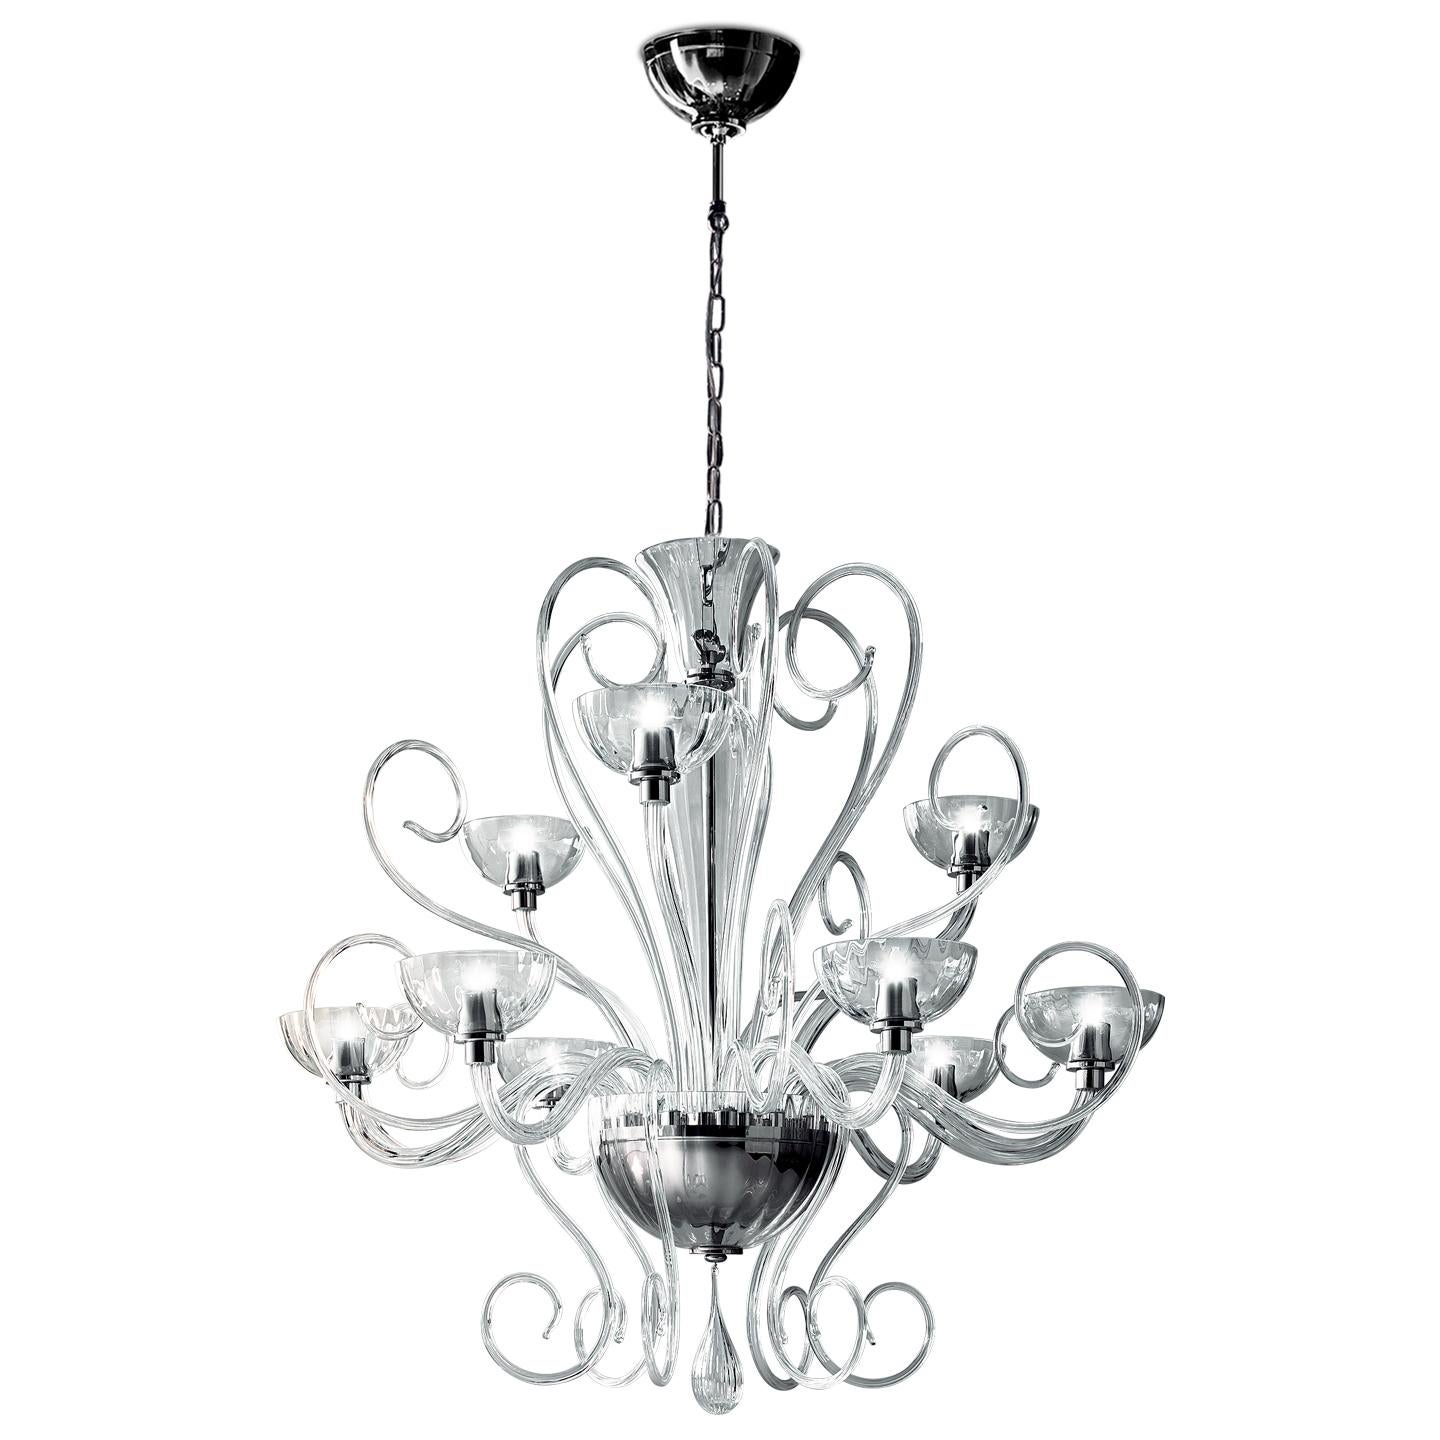 In 2005, Carlo Nason rethought the classic Murano chandelier form to create a light that was both traditional and contemporary. While the Bolero collection uses established Murano glass techniques, its form gives it a fresh playfulness and modern